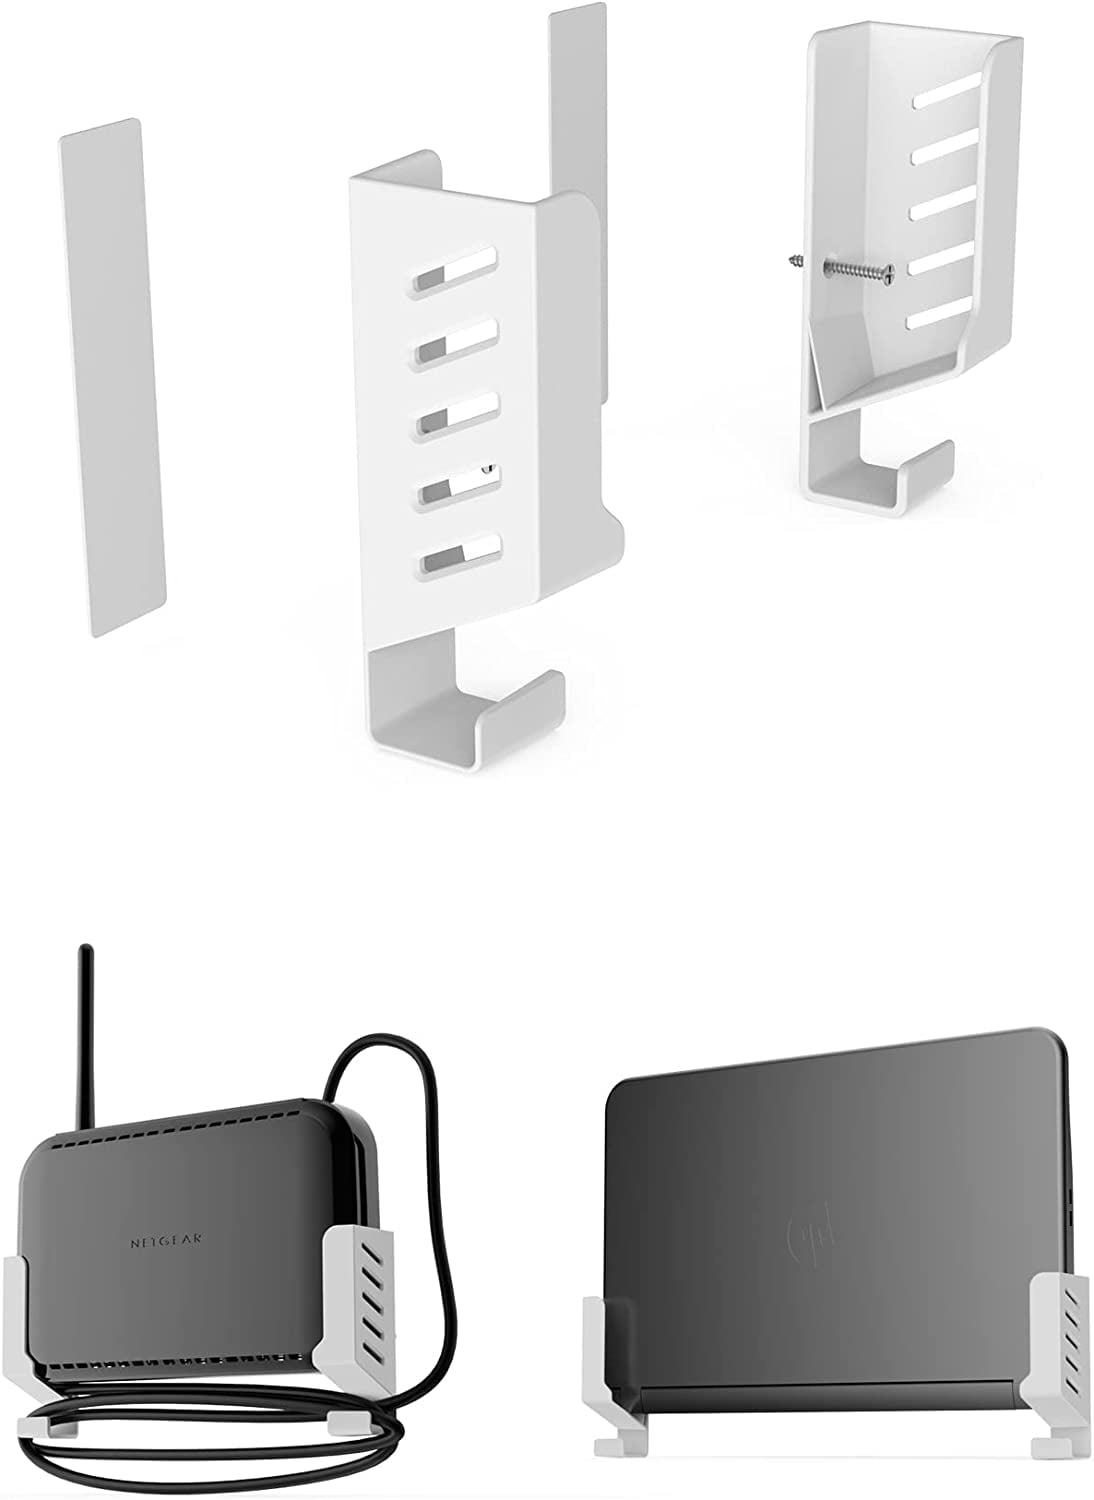 Laptop Wall Mount Cable Box Wall Mount Holder Router Wall Mount Storage  Rack Compatible with Laptops / WiFi routers /